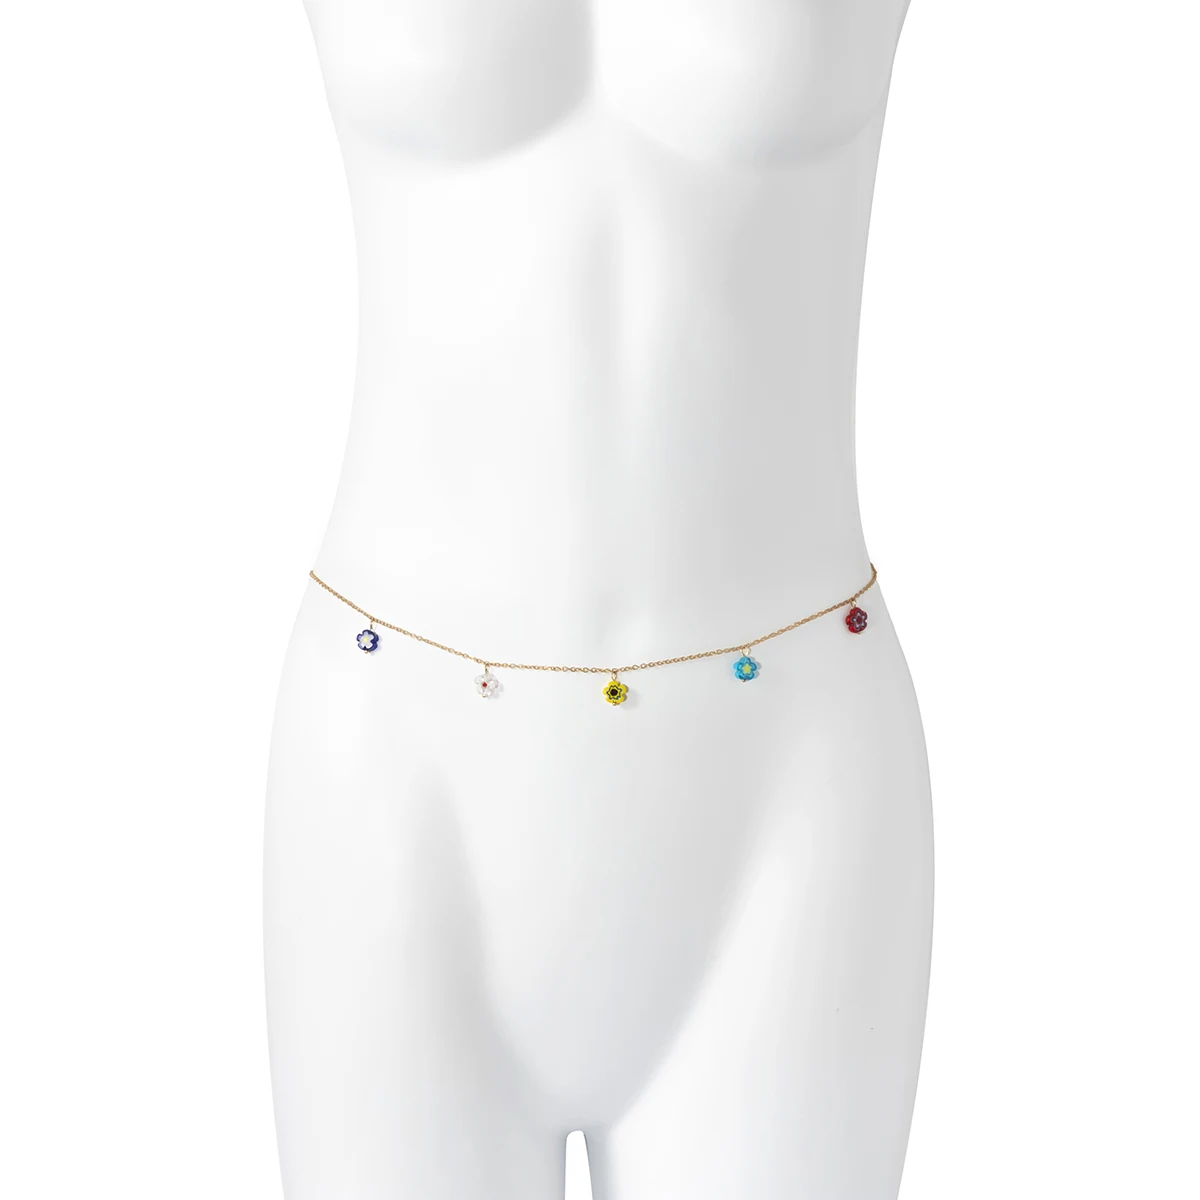 
SHIXIN Colorful Flower Waist Chains Charm Glazed Flowers Belly Chain Cute Thin Body Chain Jewelry for Woman Girl 